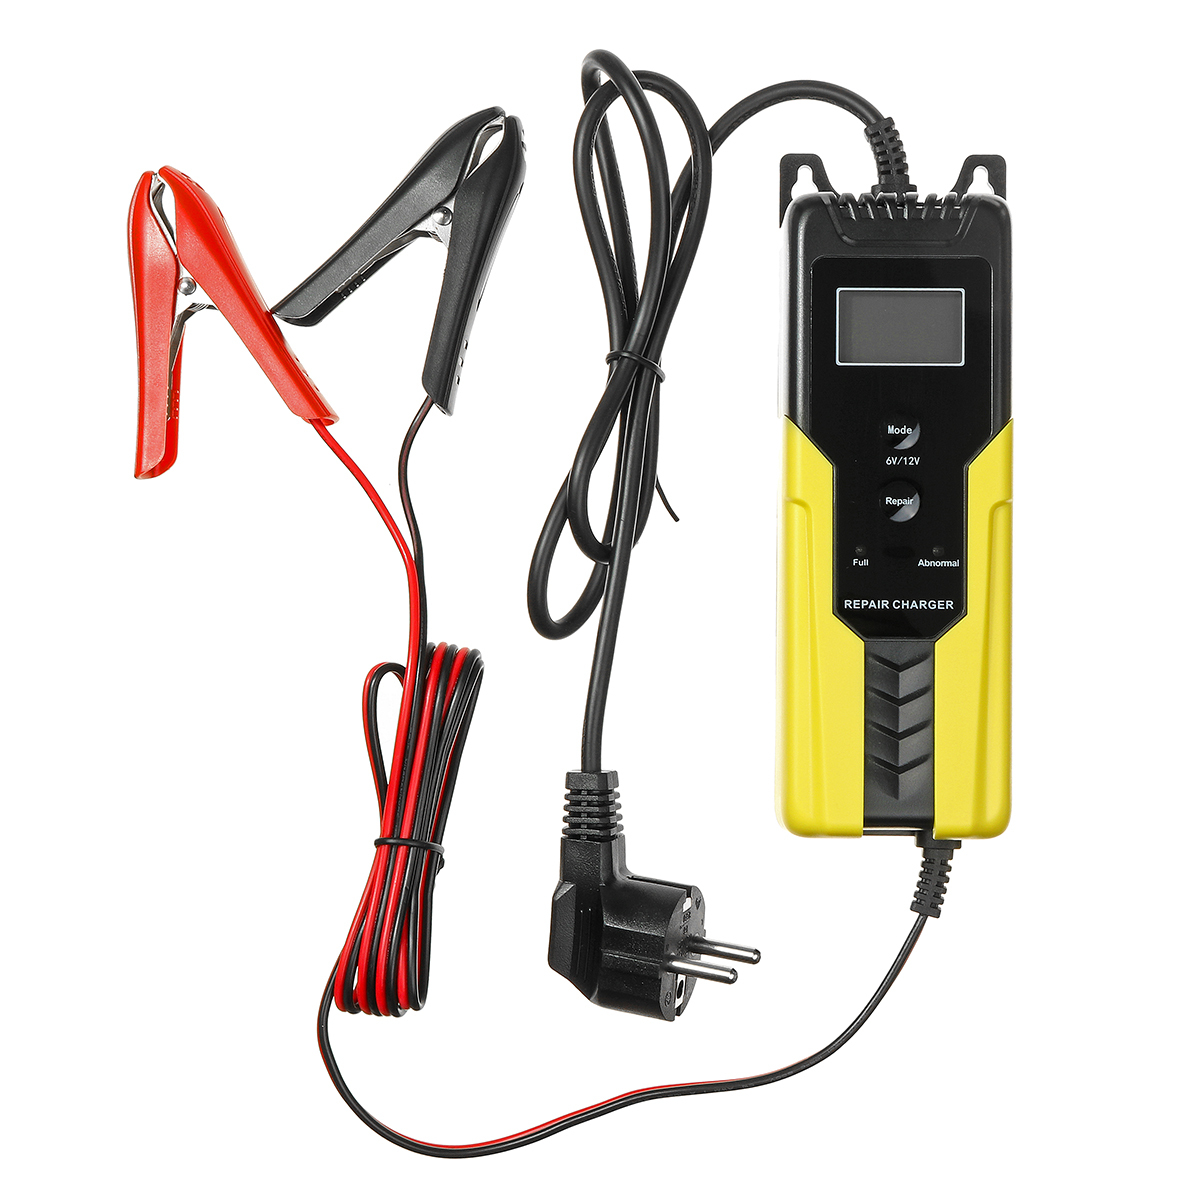 Intelligent LCD 4.5-100AH Output 6V/2A 12V/4A Car Motorcycle Automatic Pulse Battery Charger